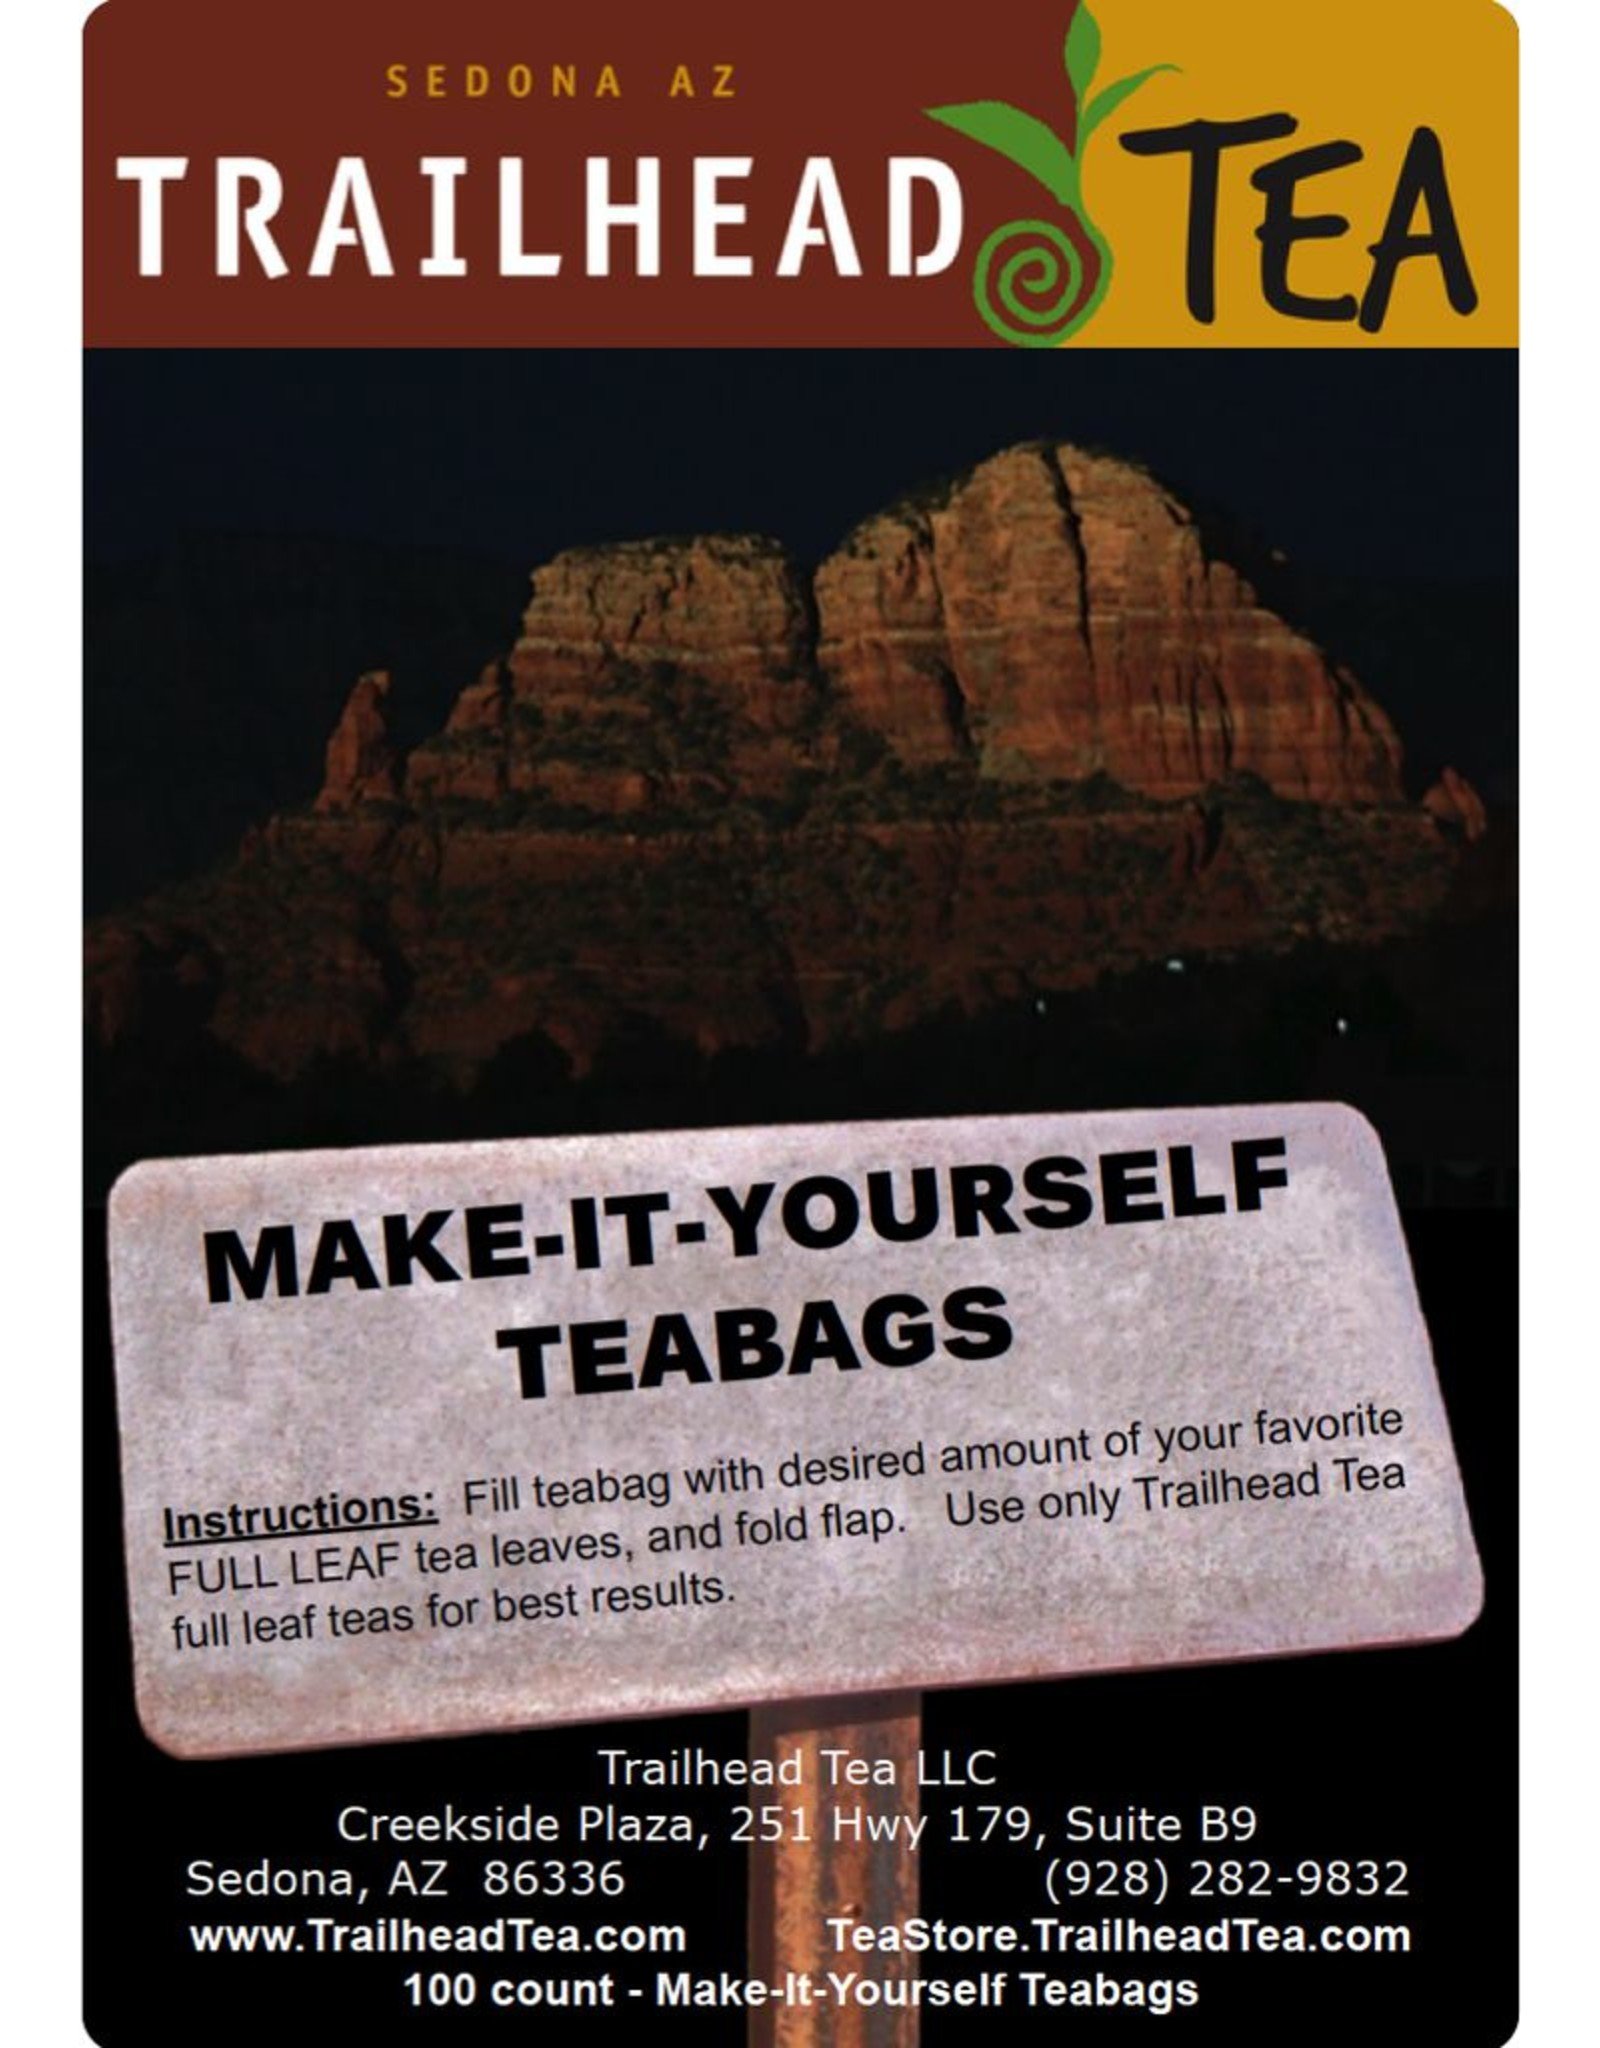 Teaware Make-It-Yourself Tea Bags (100 pack) with tag